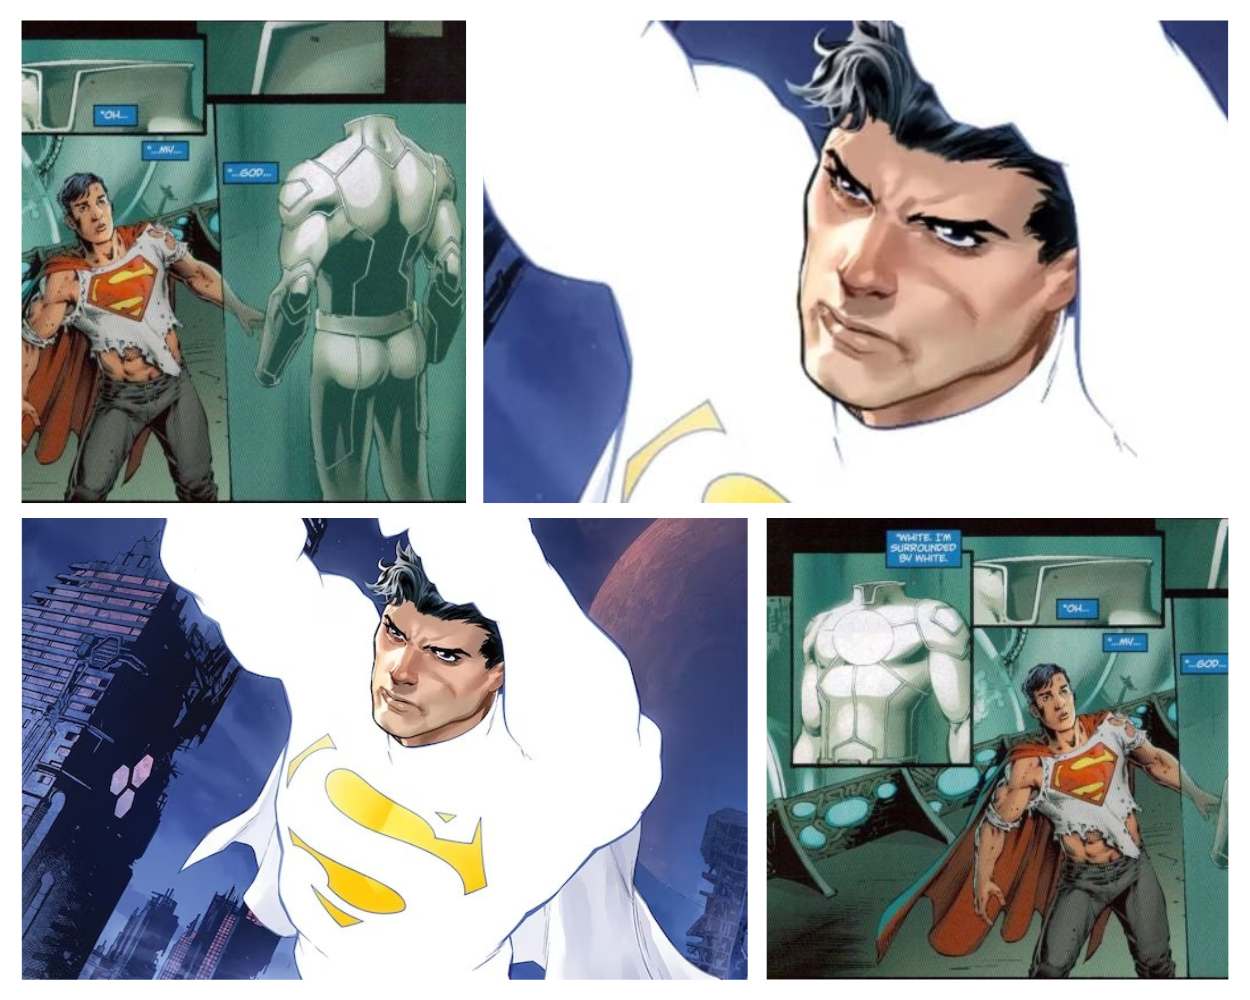 Superman Receives New All-White Costume